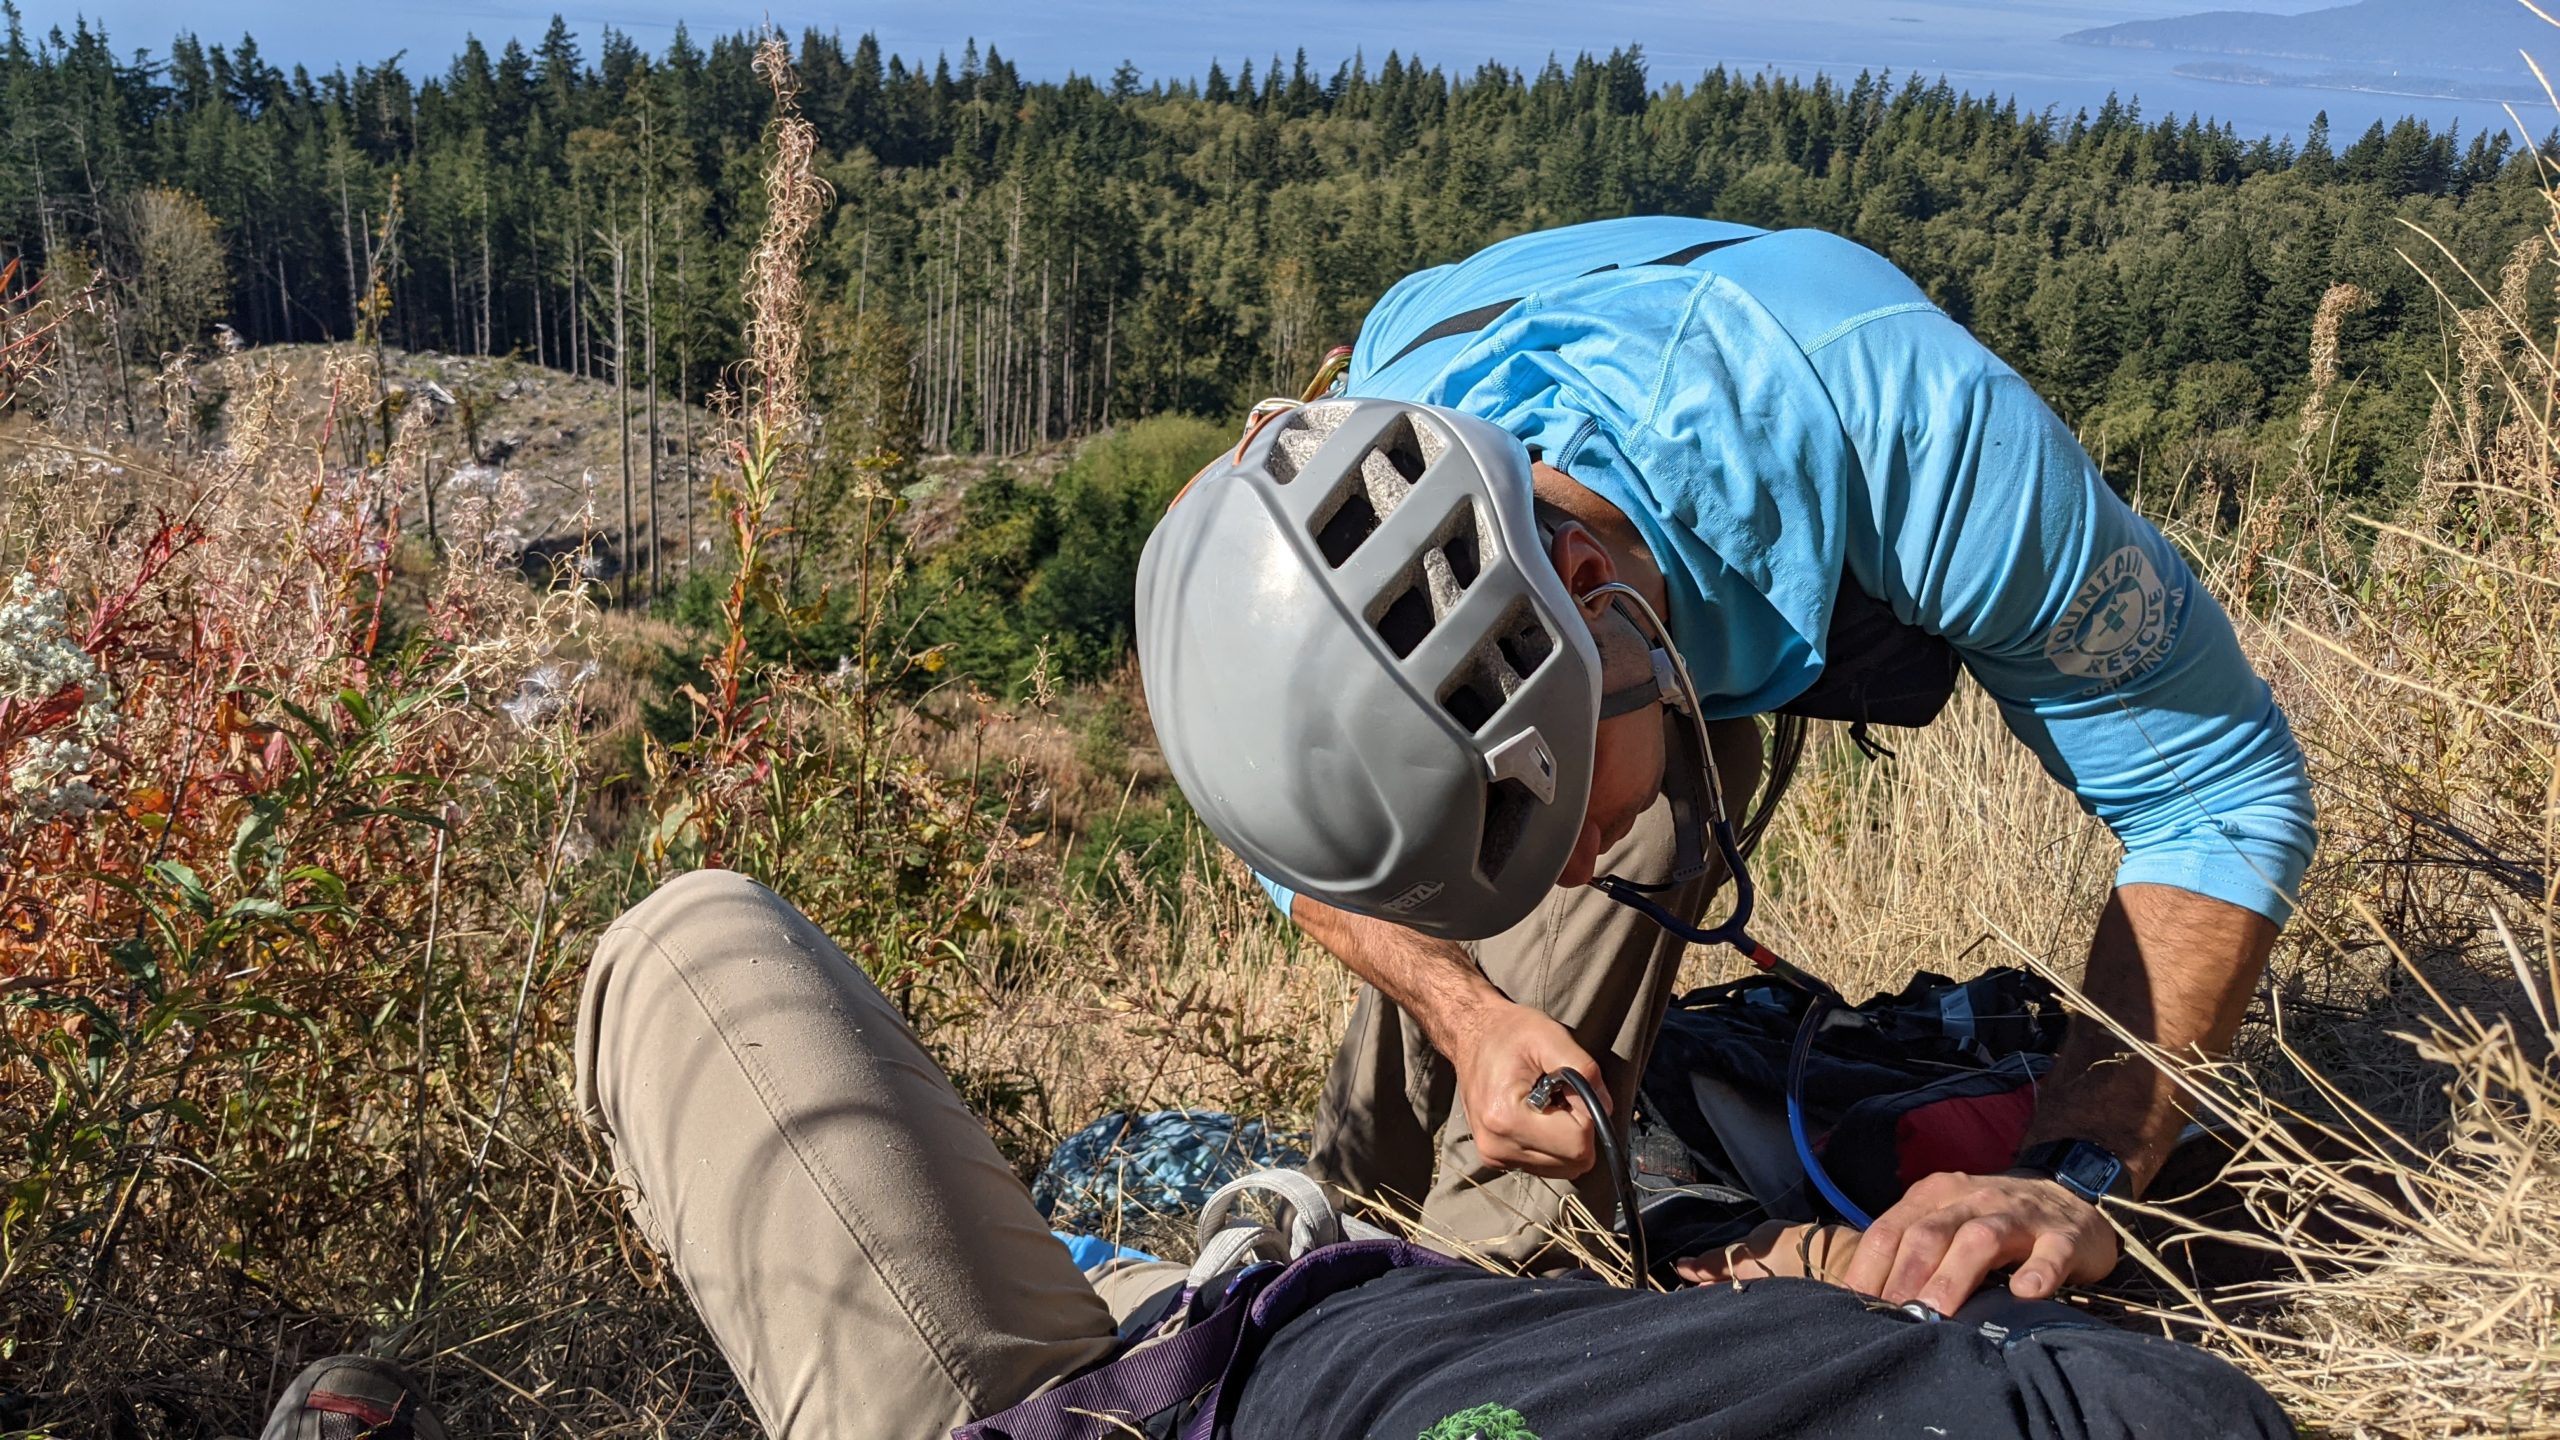 A rescuer measures blood pressure in a picturesque setting overlooking the Salish Sea